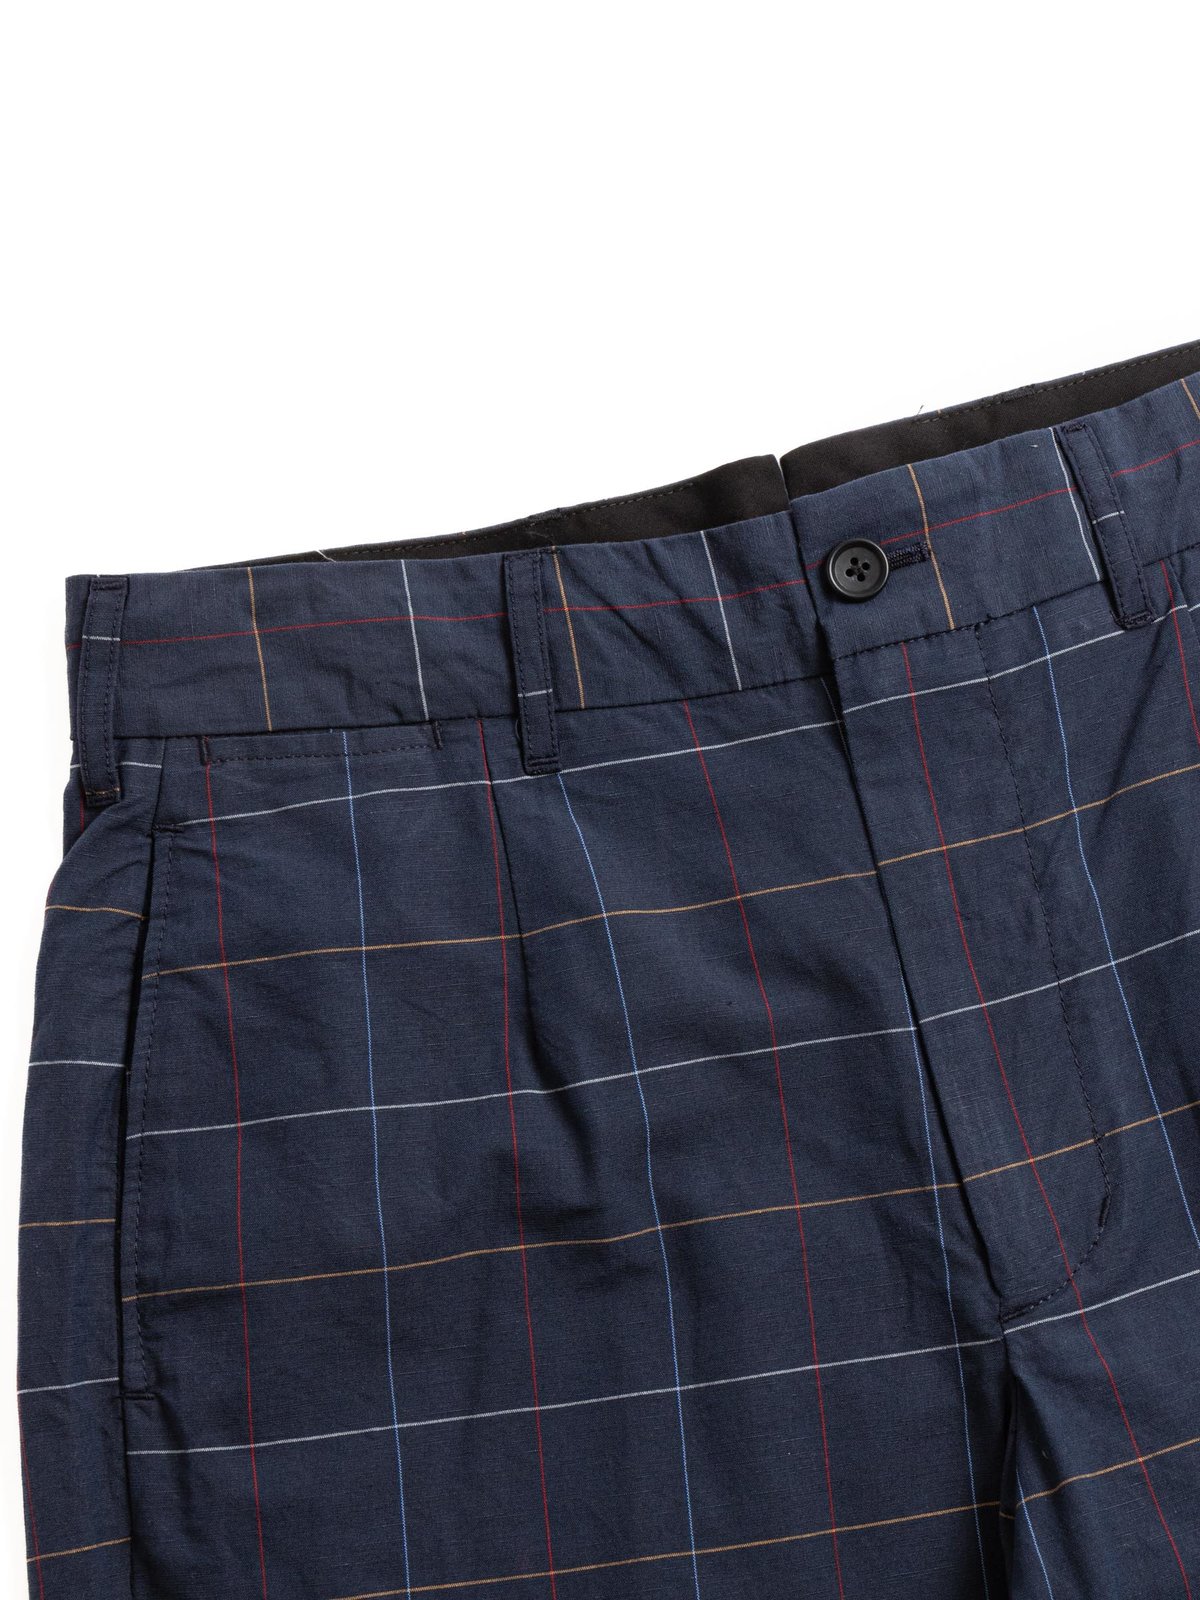 ANDOVER PANT NAVY CL WINDOWPANE - Image 2